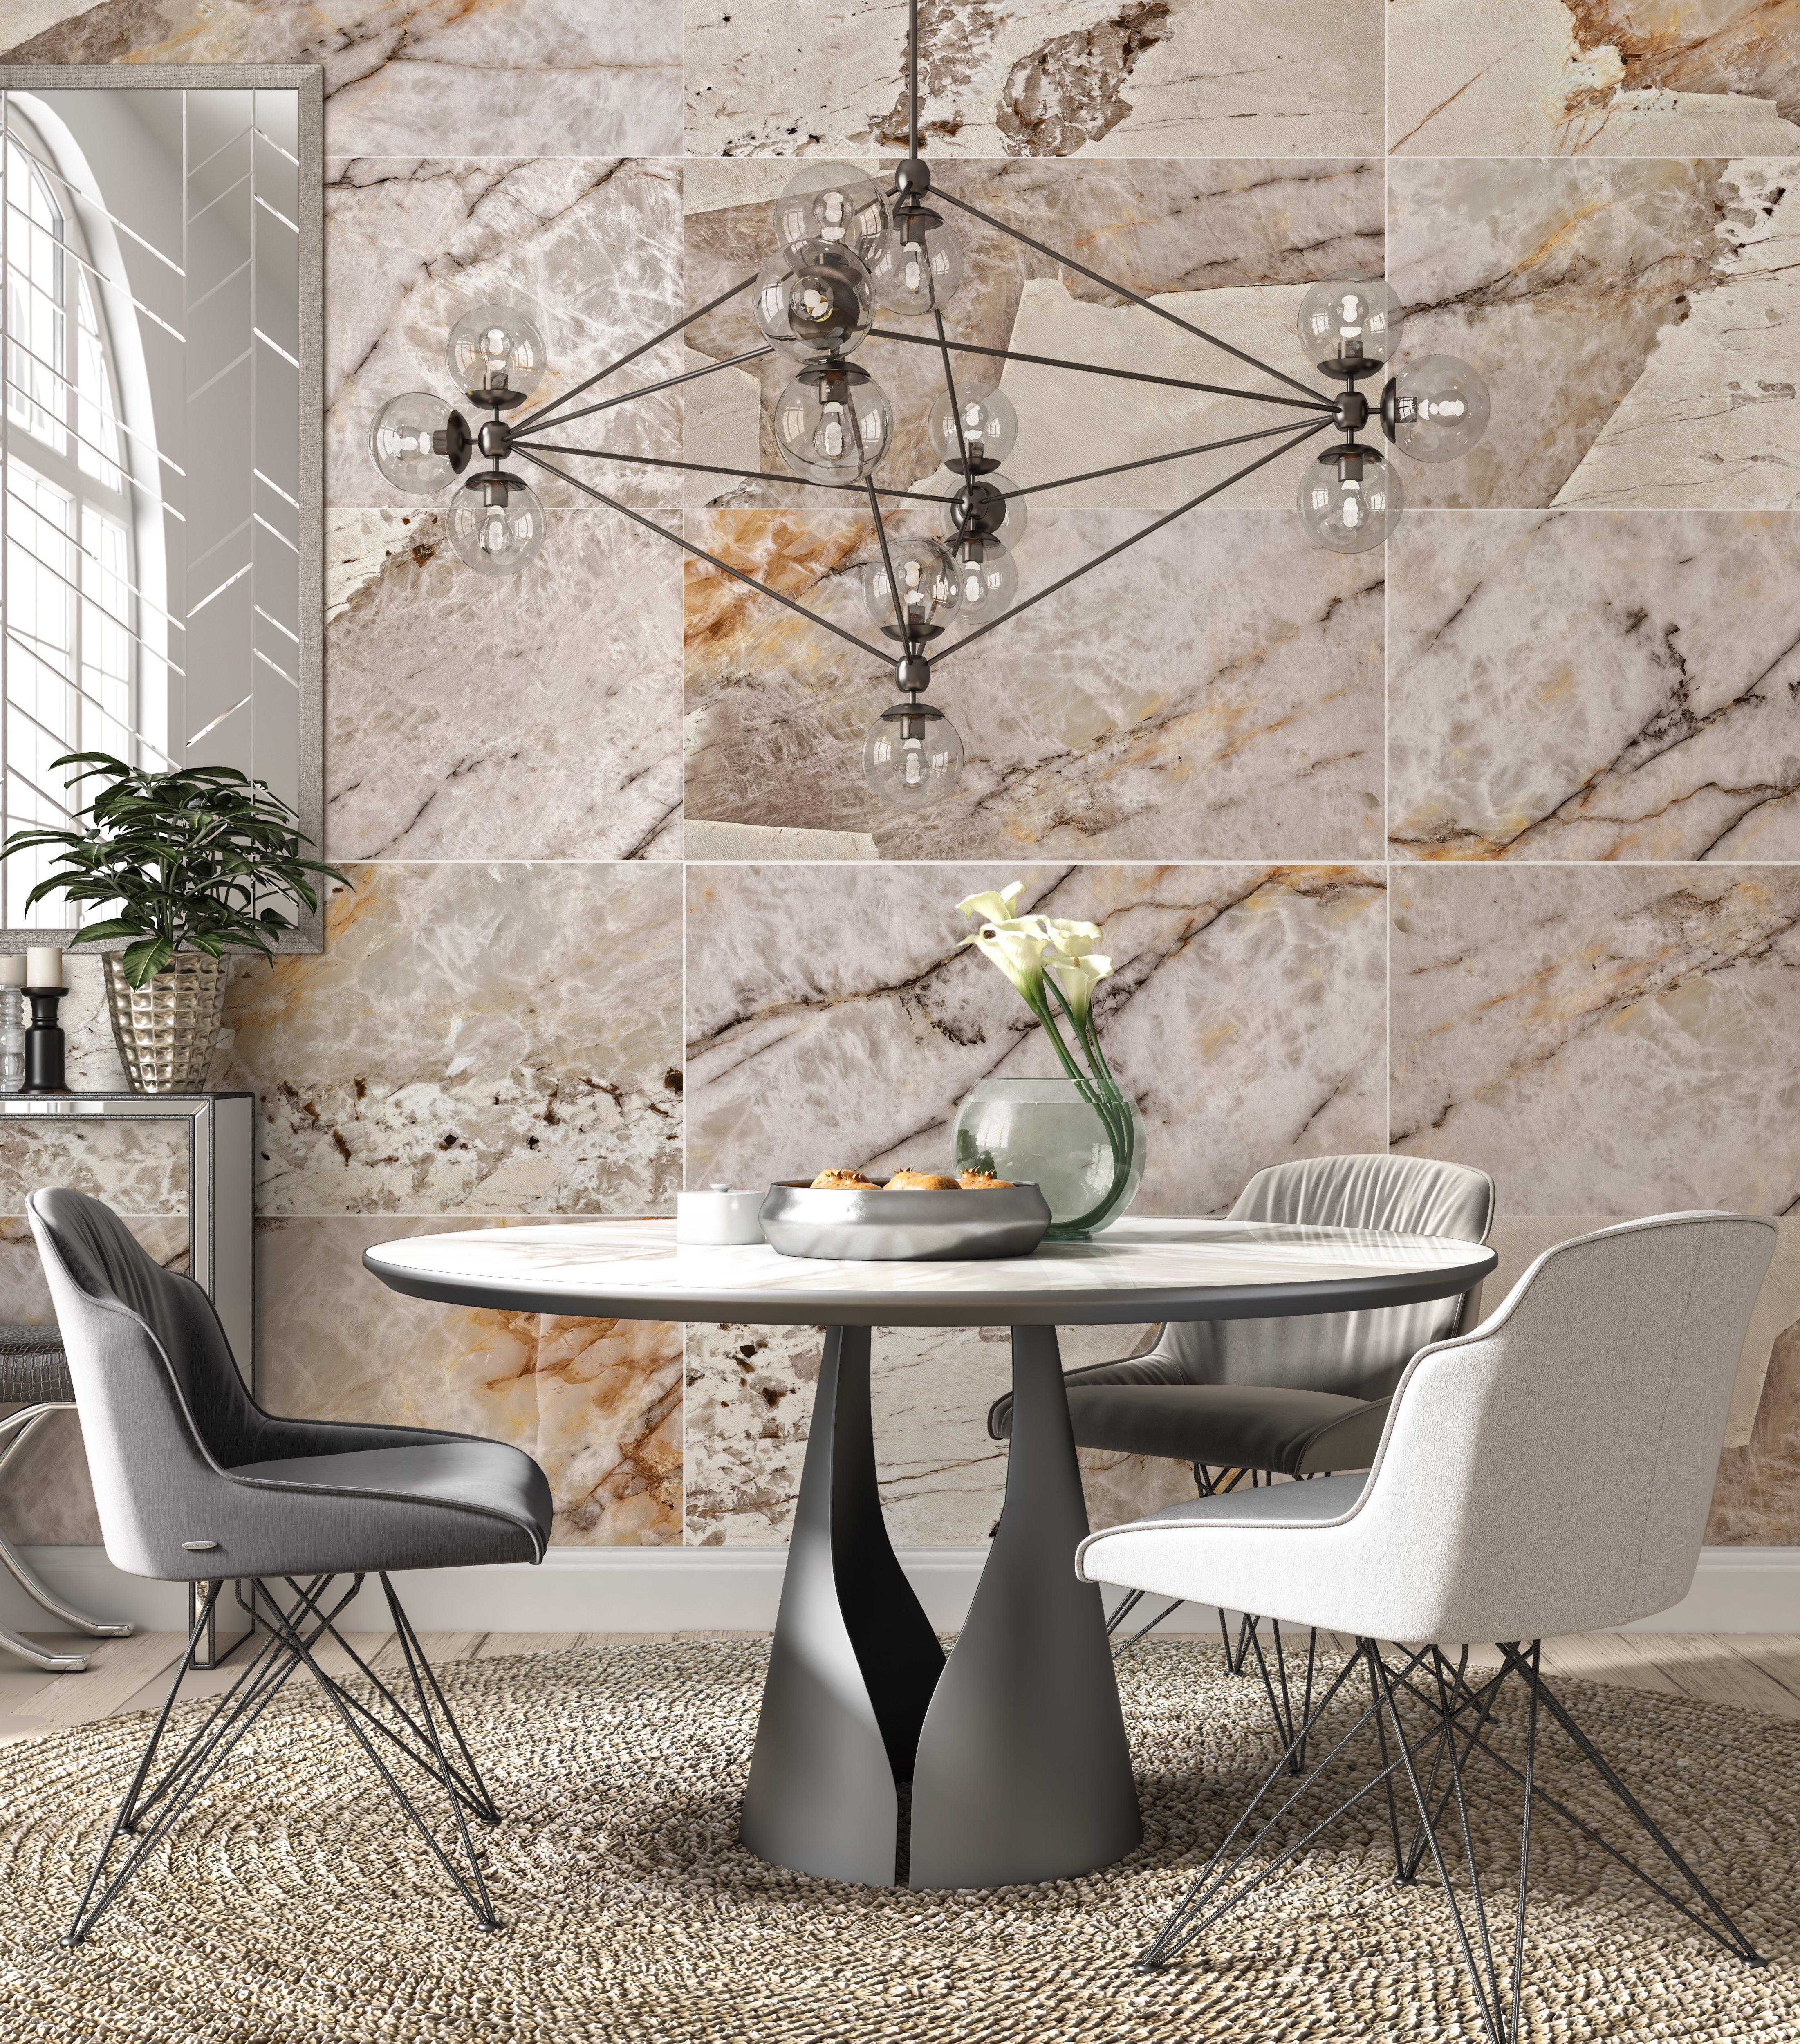 Vicenzo Fiore Polished Porcelain Tile